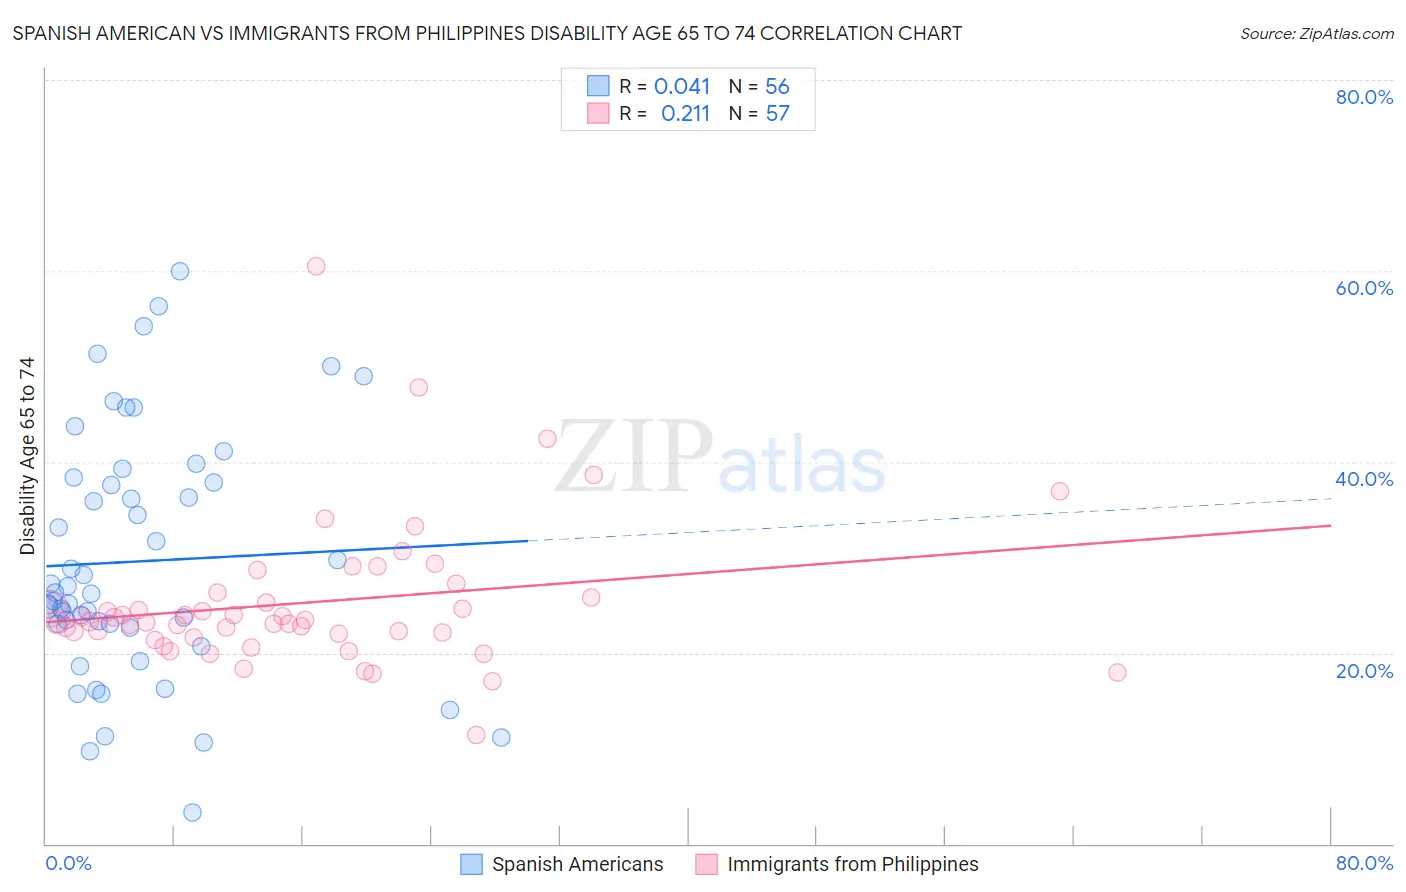 Spanish American vs Immigrants from Philippines Disability Age 65 to 74